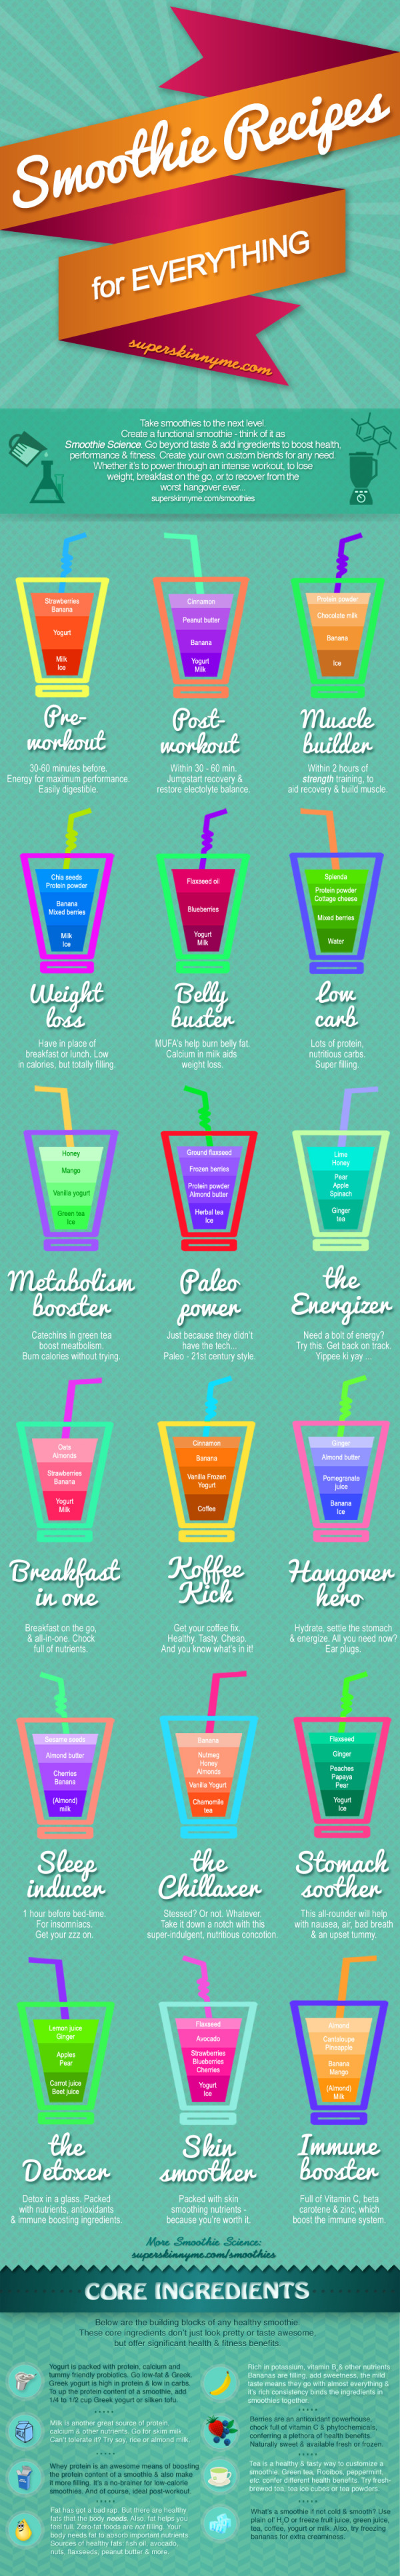 Smoothie Recipes For Everything infographic